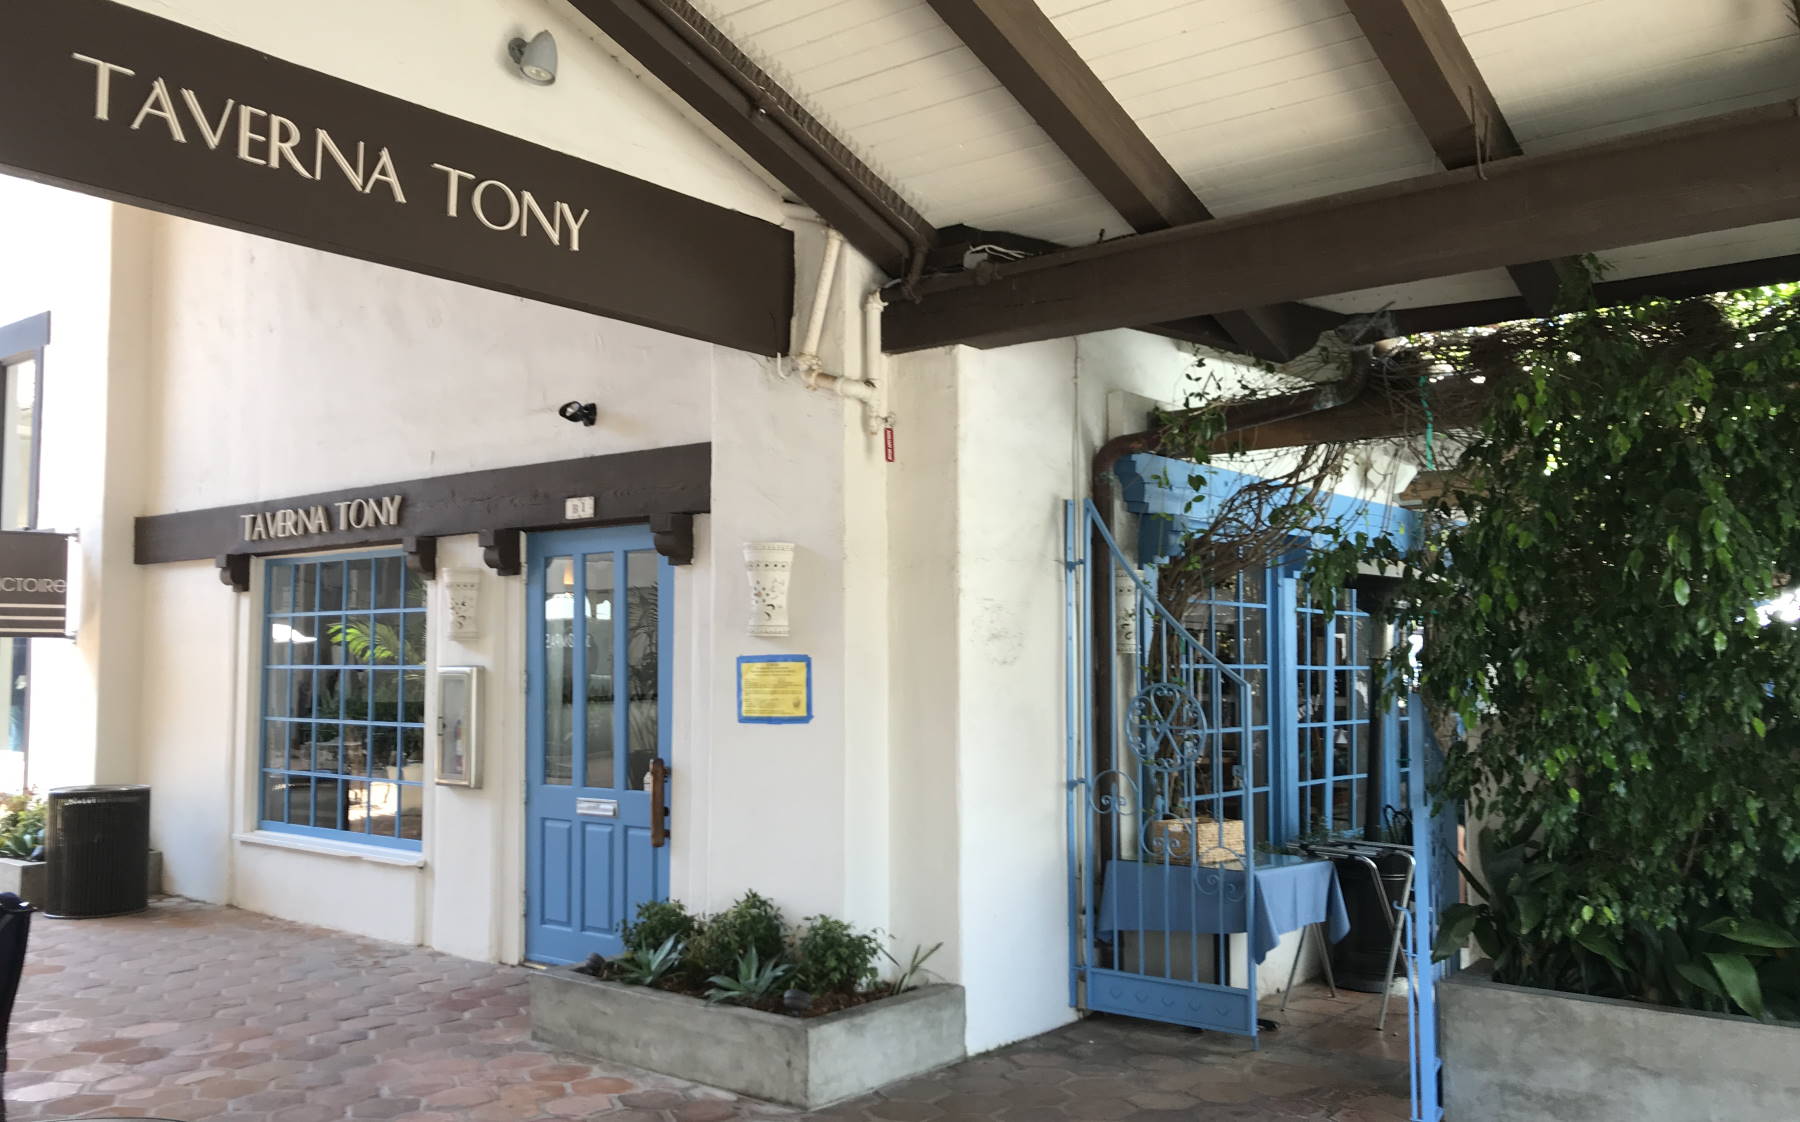 Entrance to Taverna Tony, which features Mediterranean food